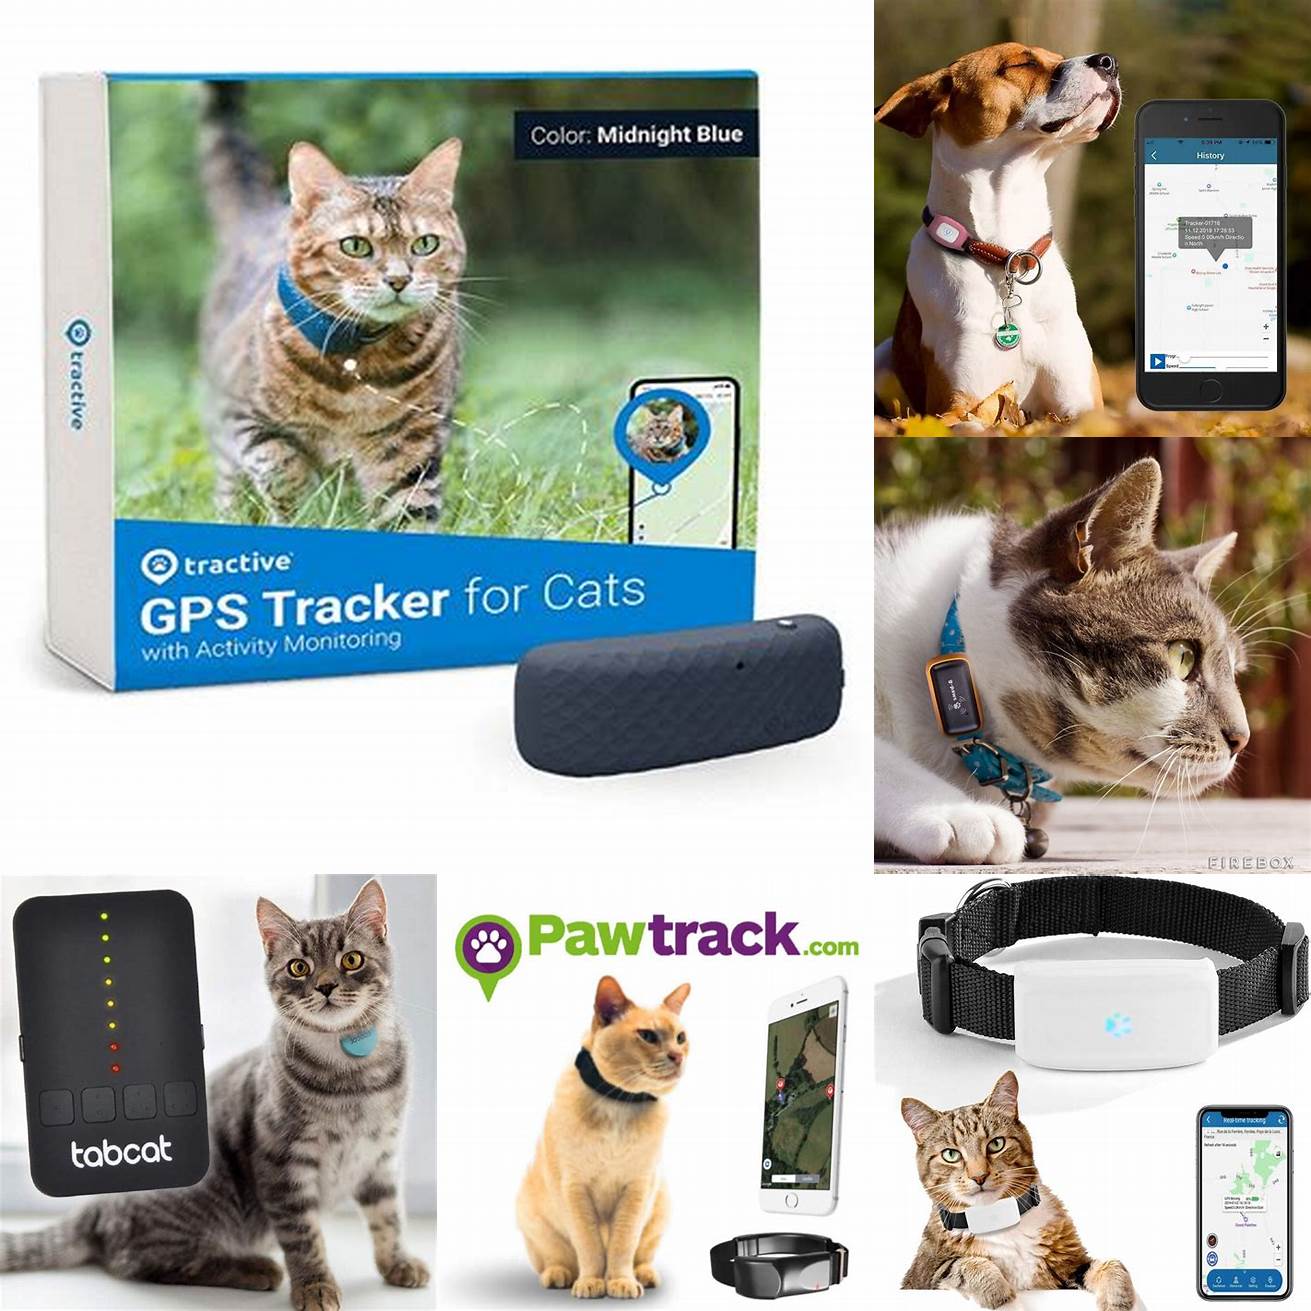 Q Is the GPS tracking device accurate